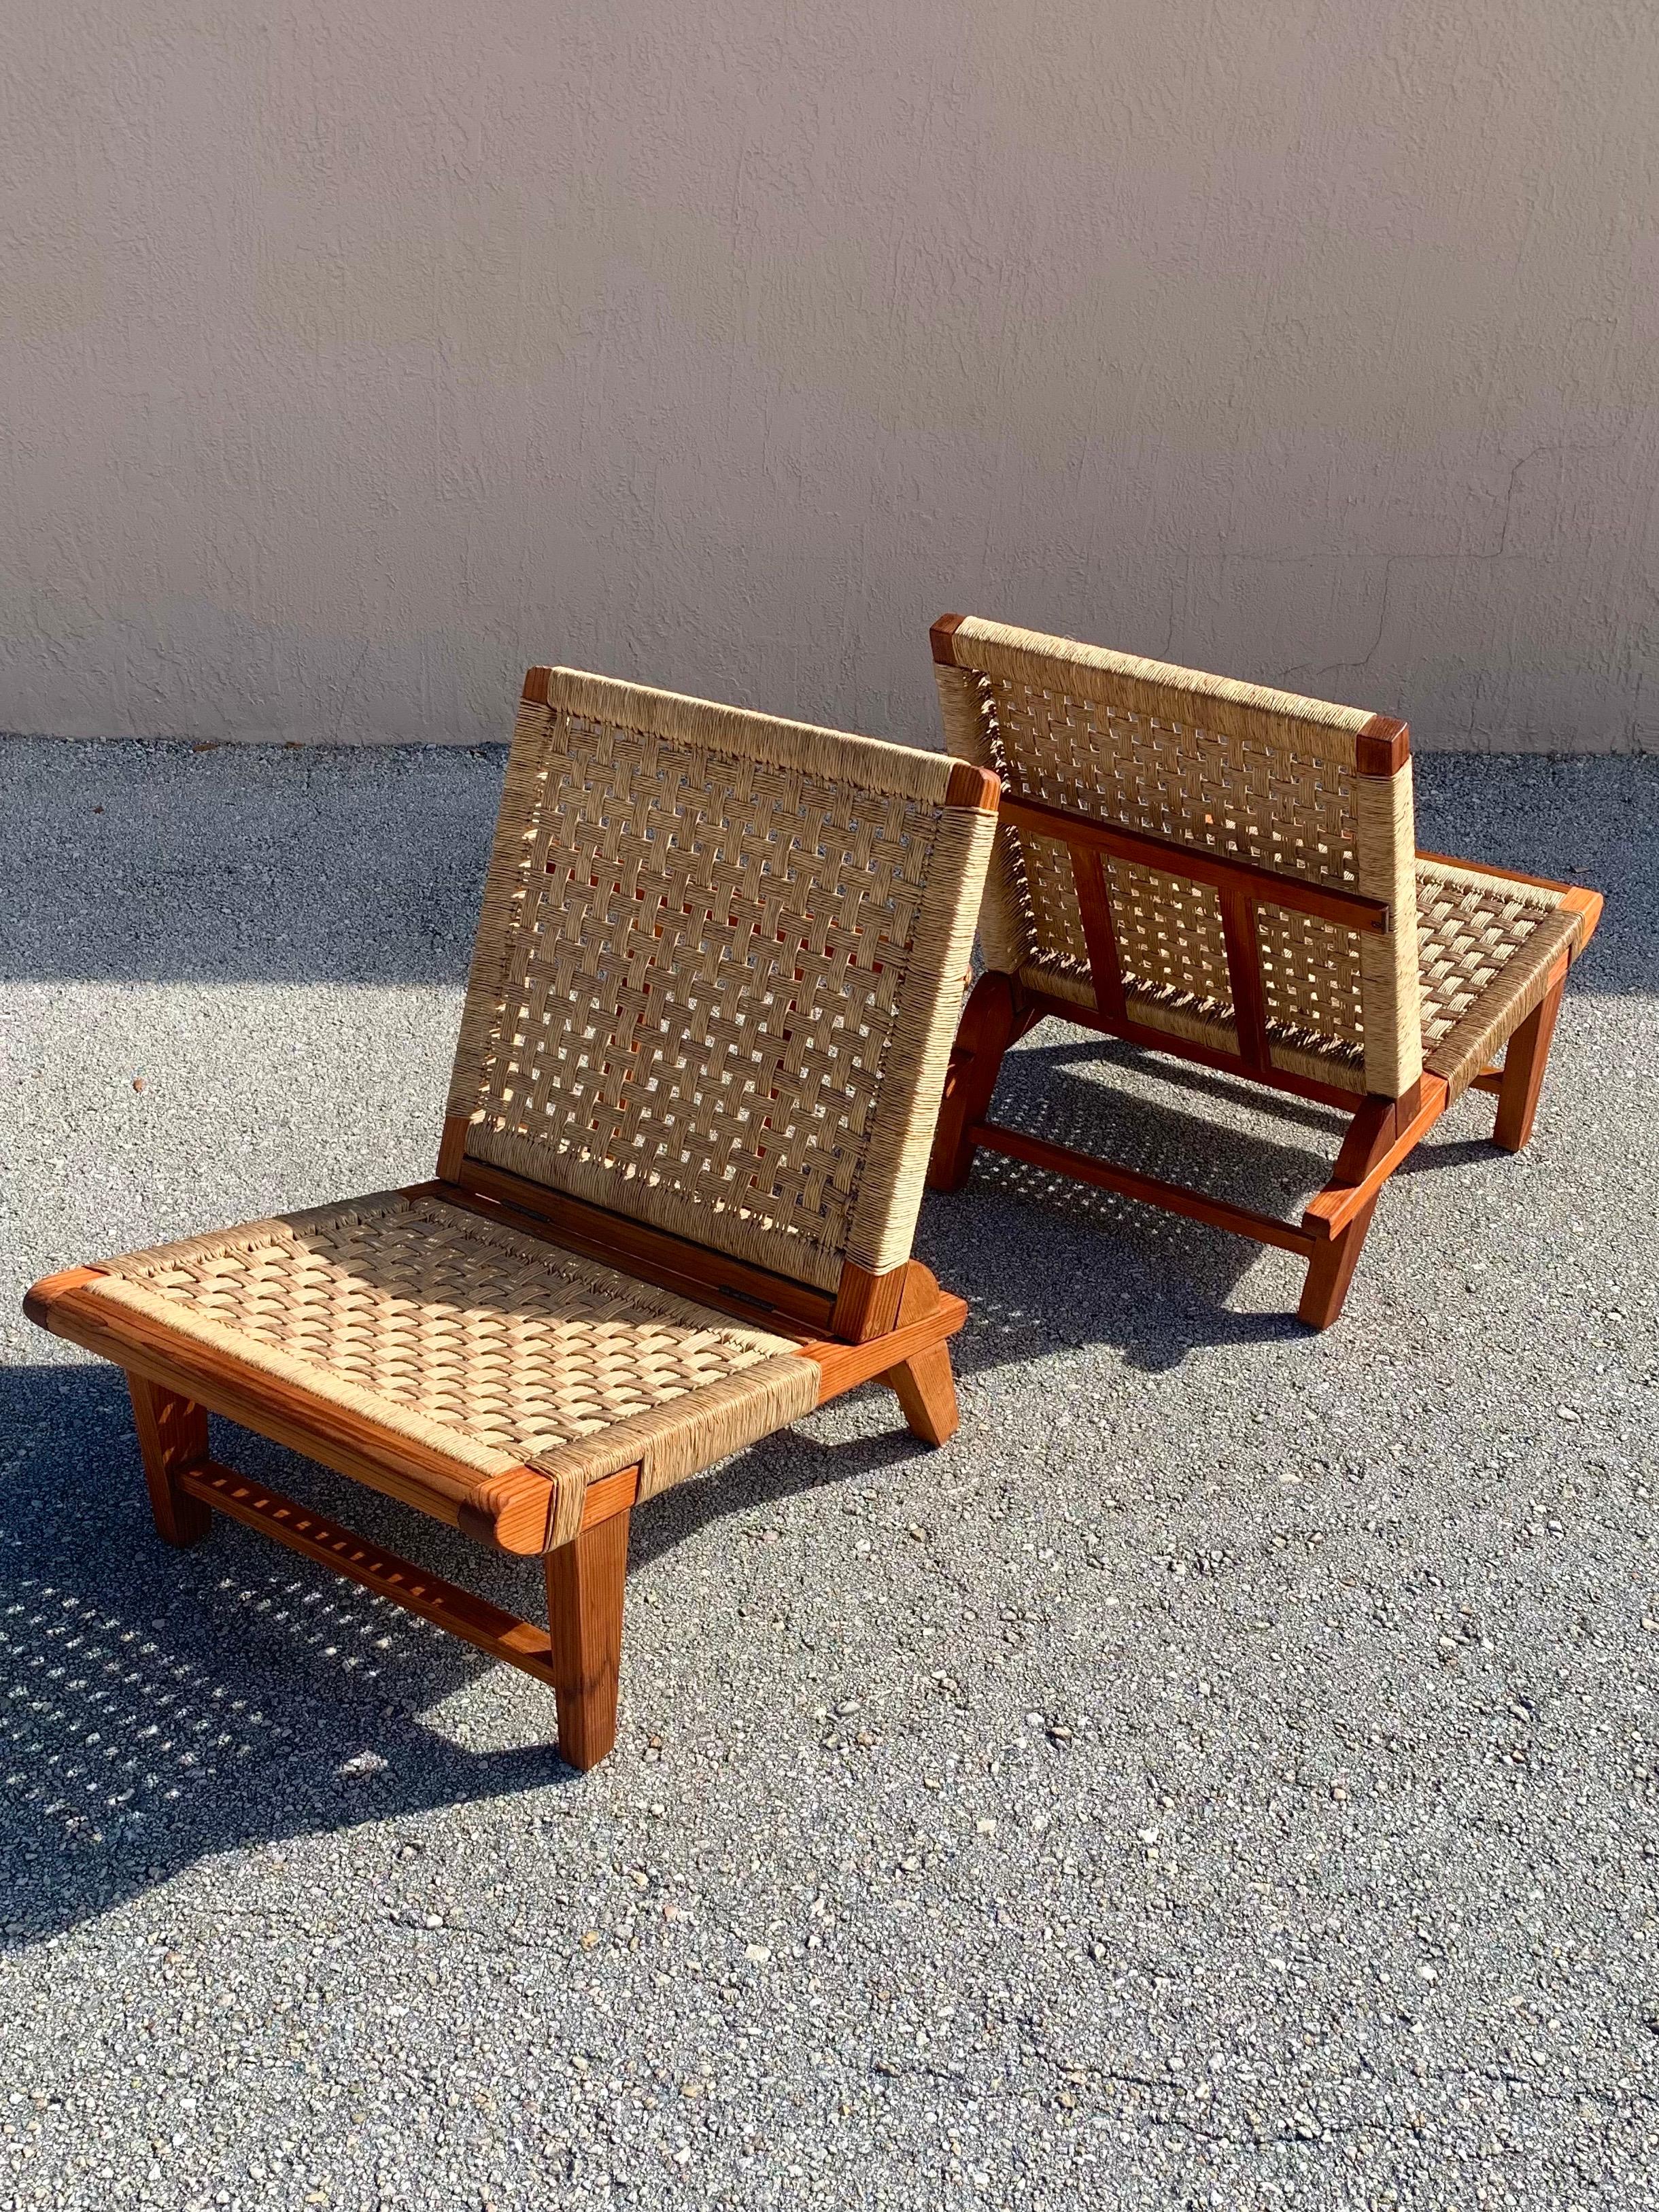 Rush Pair of Mahogany Folding Chairs by Michael van Beuren for Domus of Mexico City